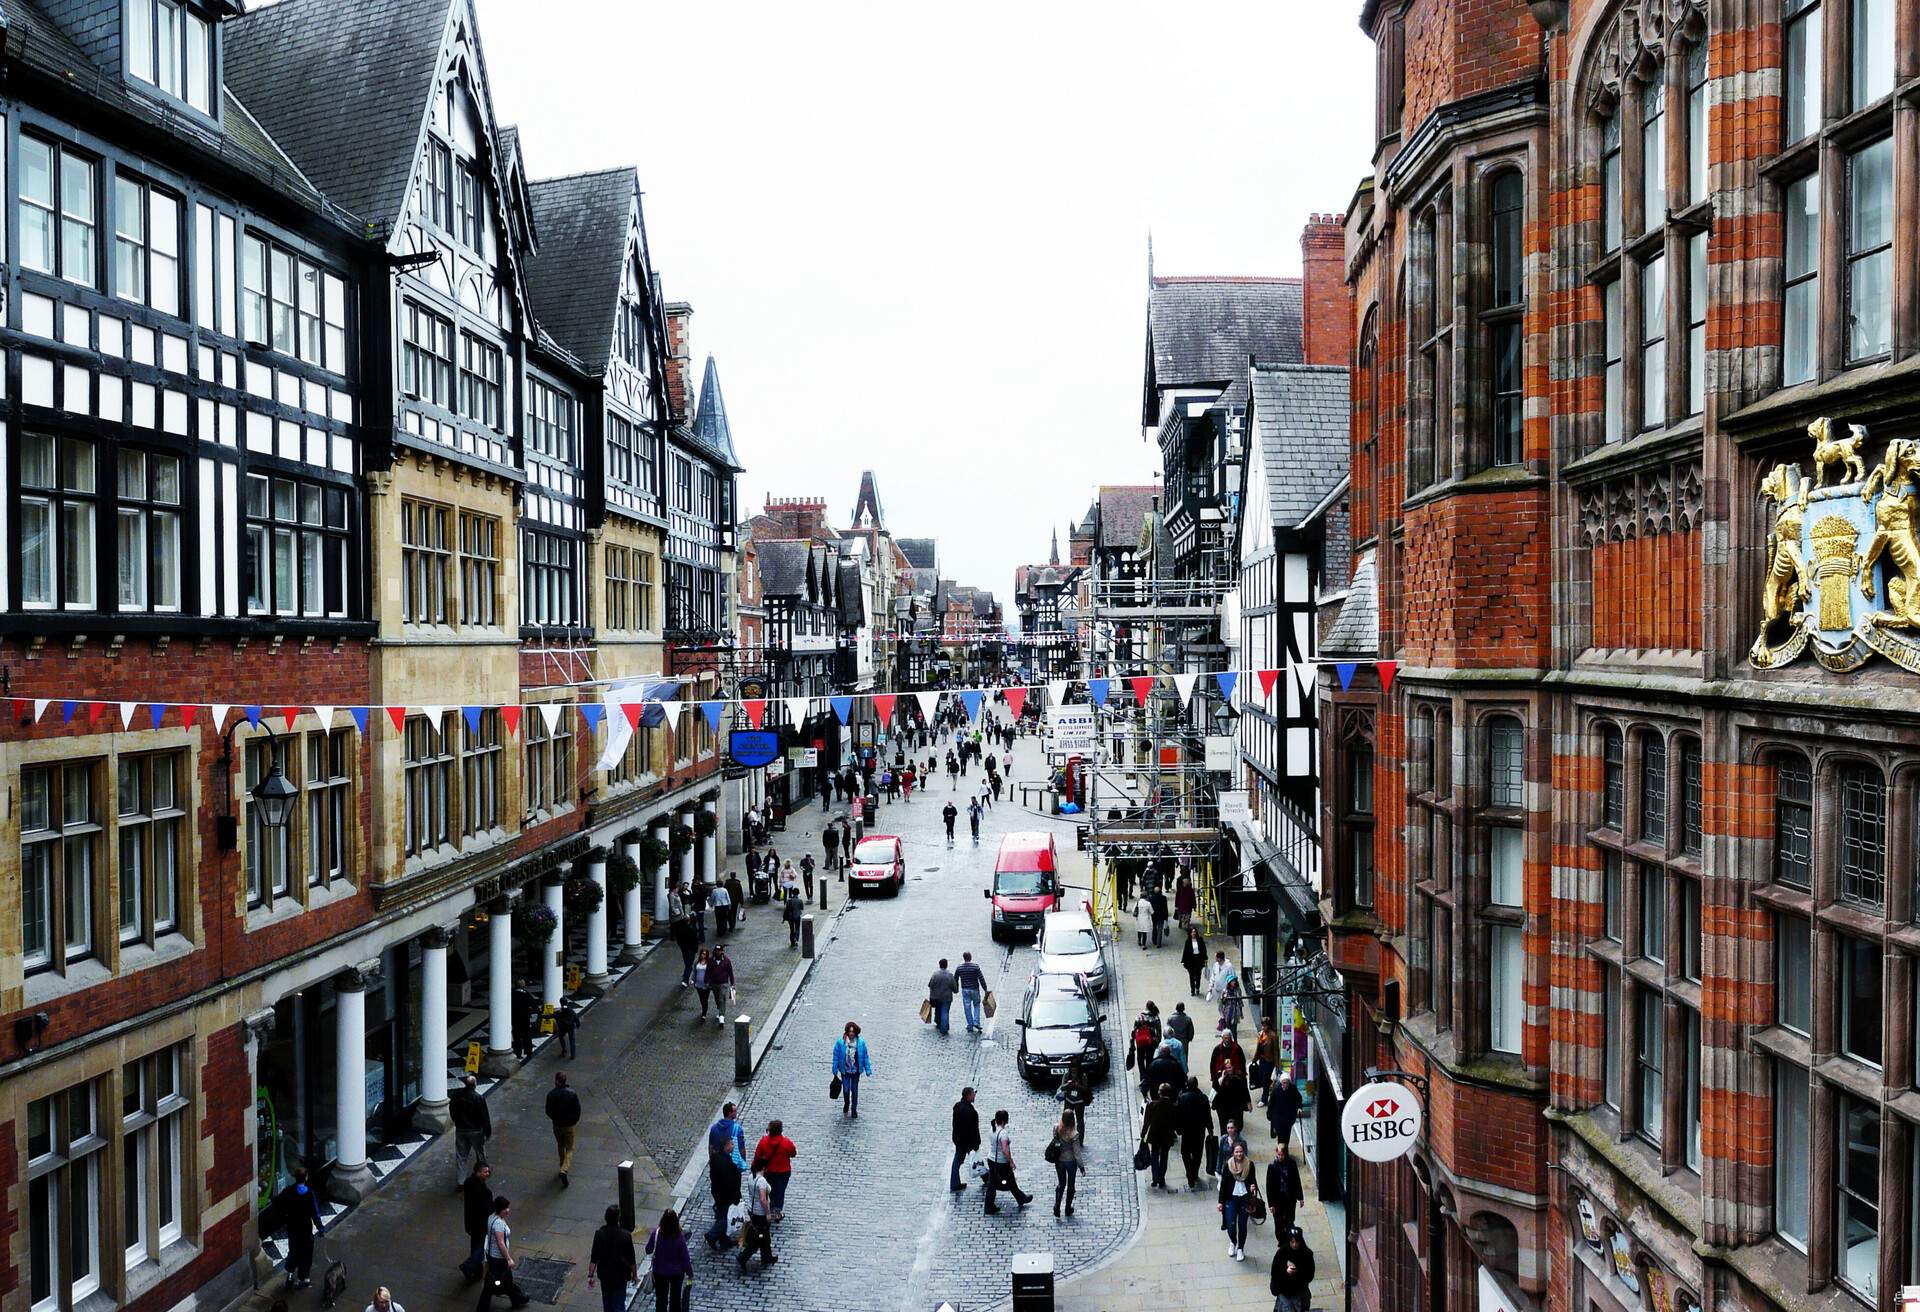 A crowded cobbled street lined on both sides by tall buildings in an overcast.